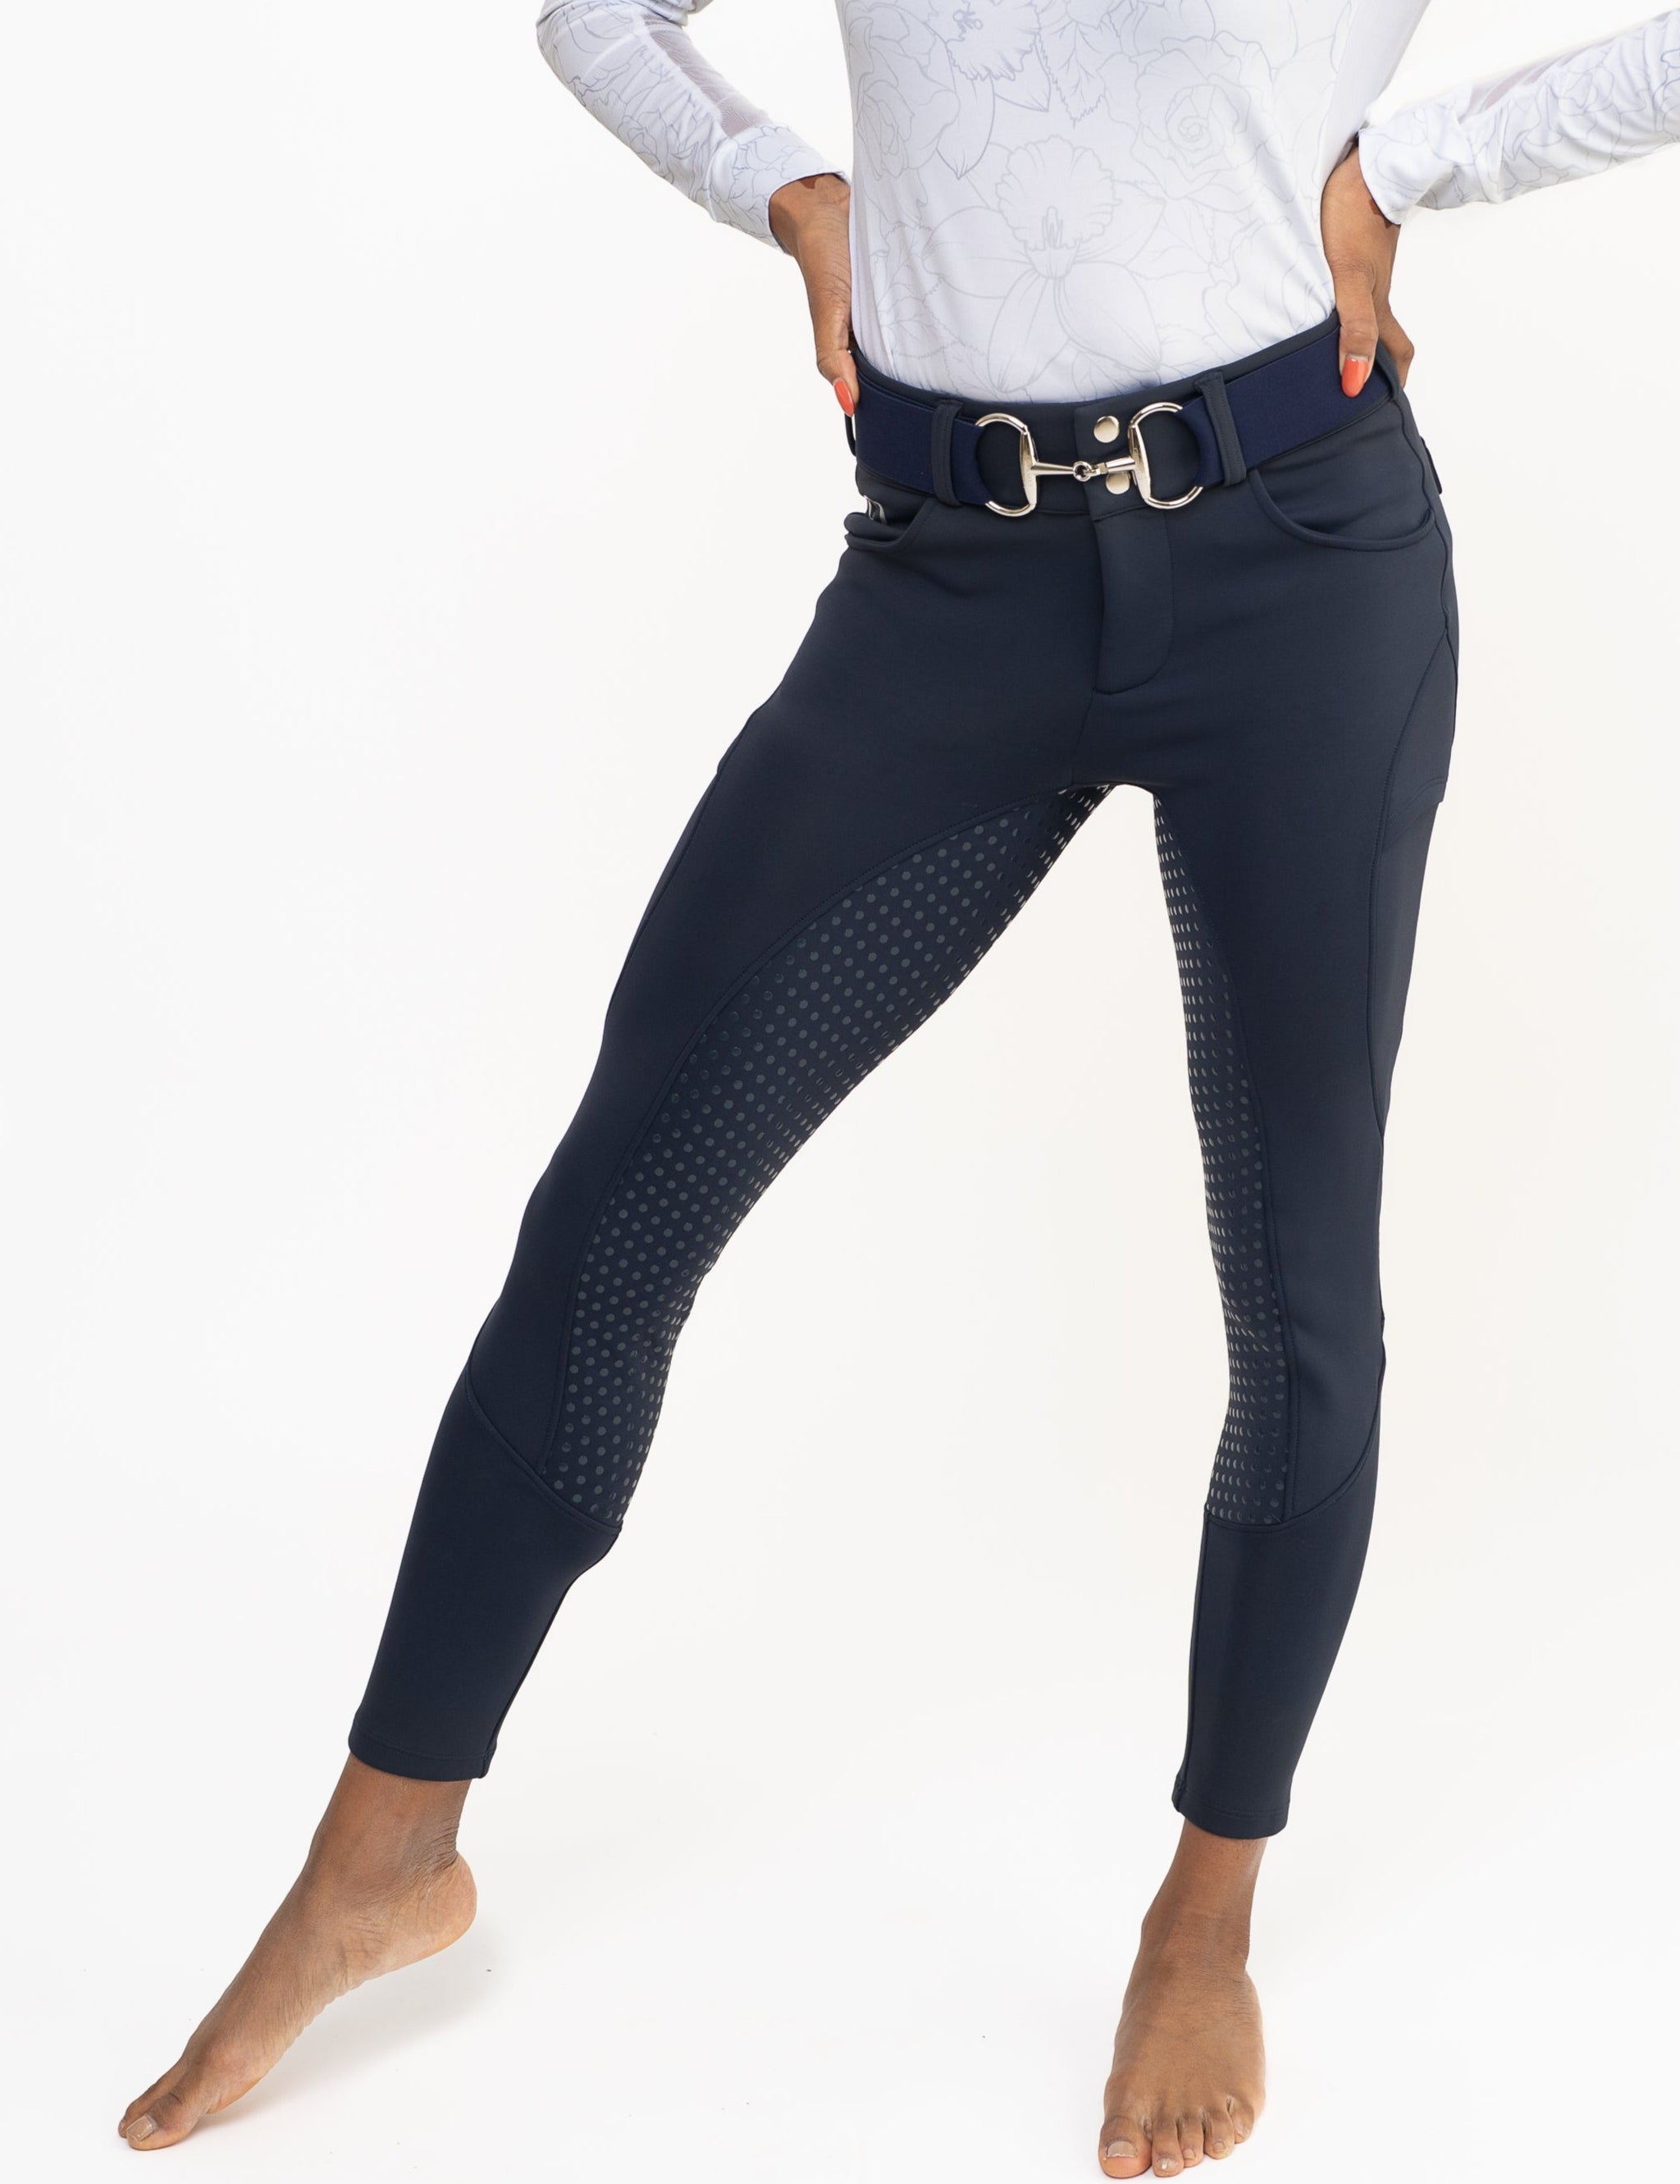 White Full Seat Winter Mid-Weight Breeches – CorrectConnect